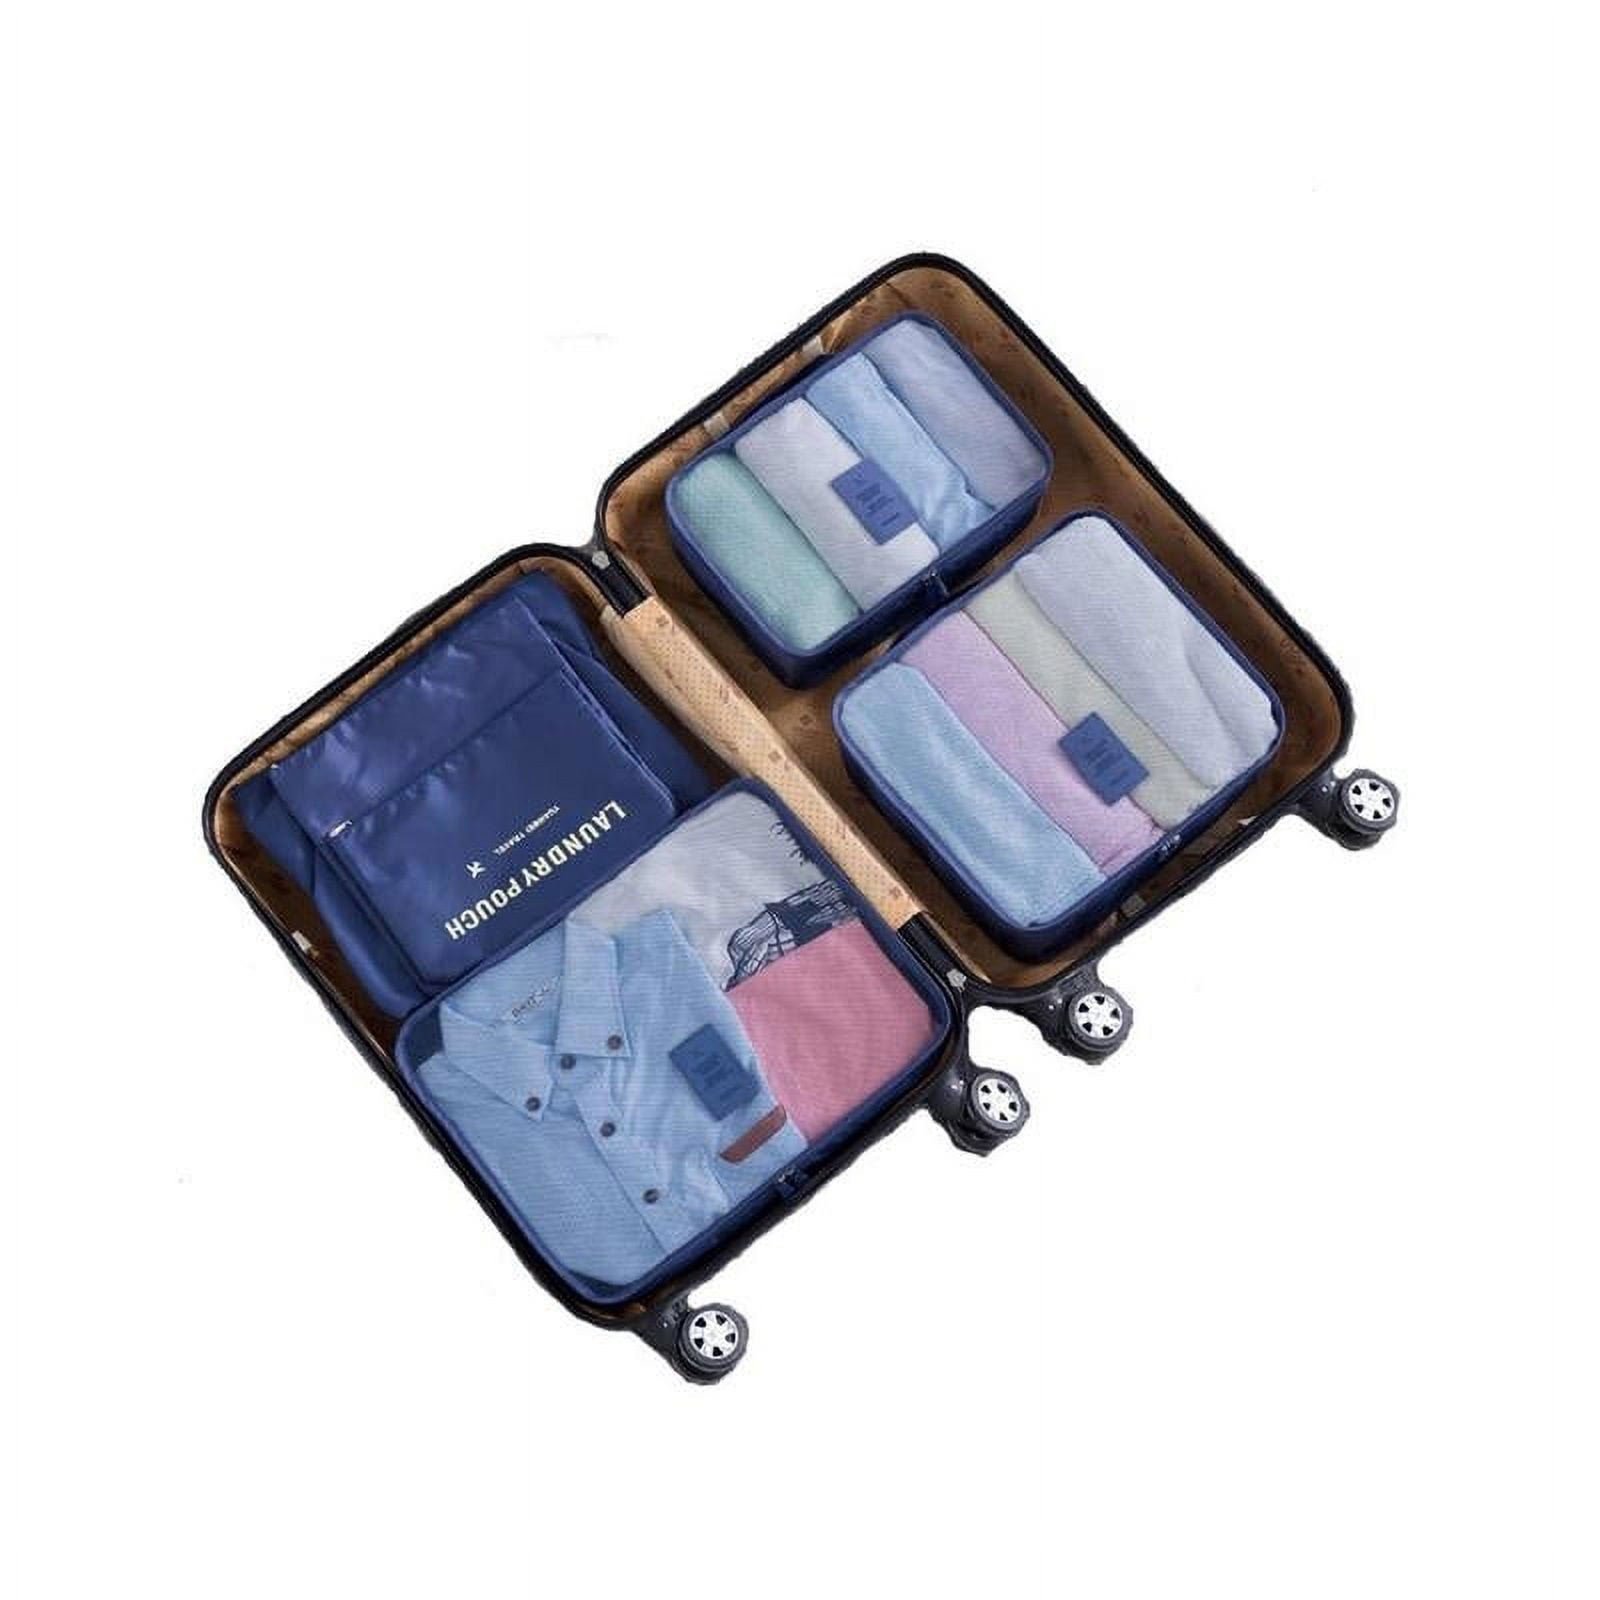 Velimley 6 Set Packing Cubes for Suitcases, Travel Luggage Packing